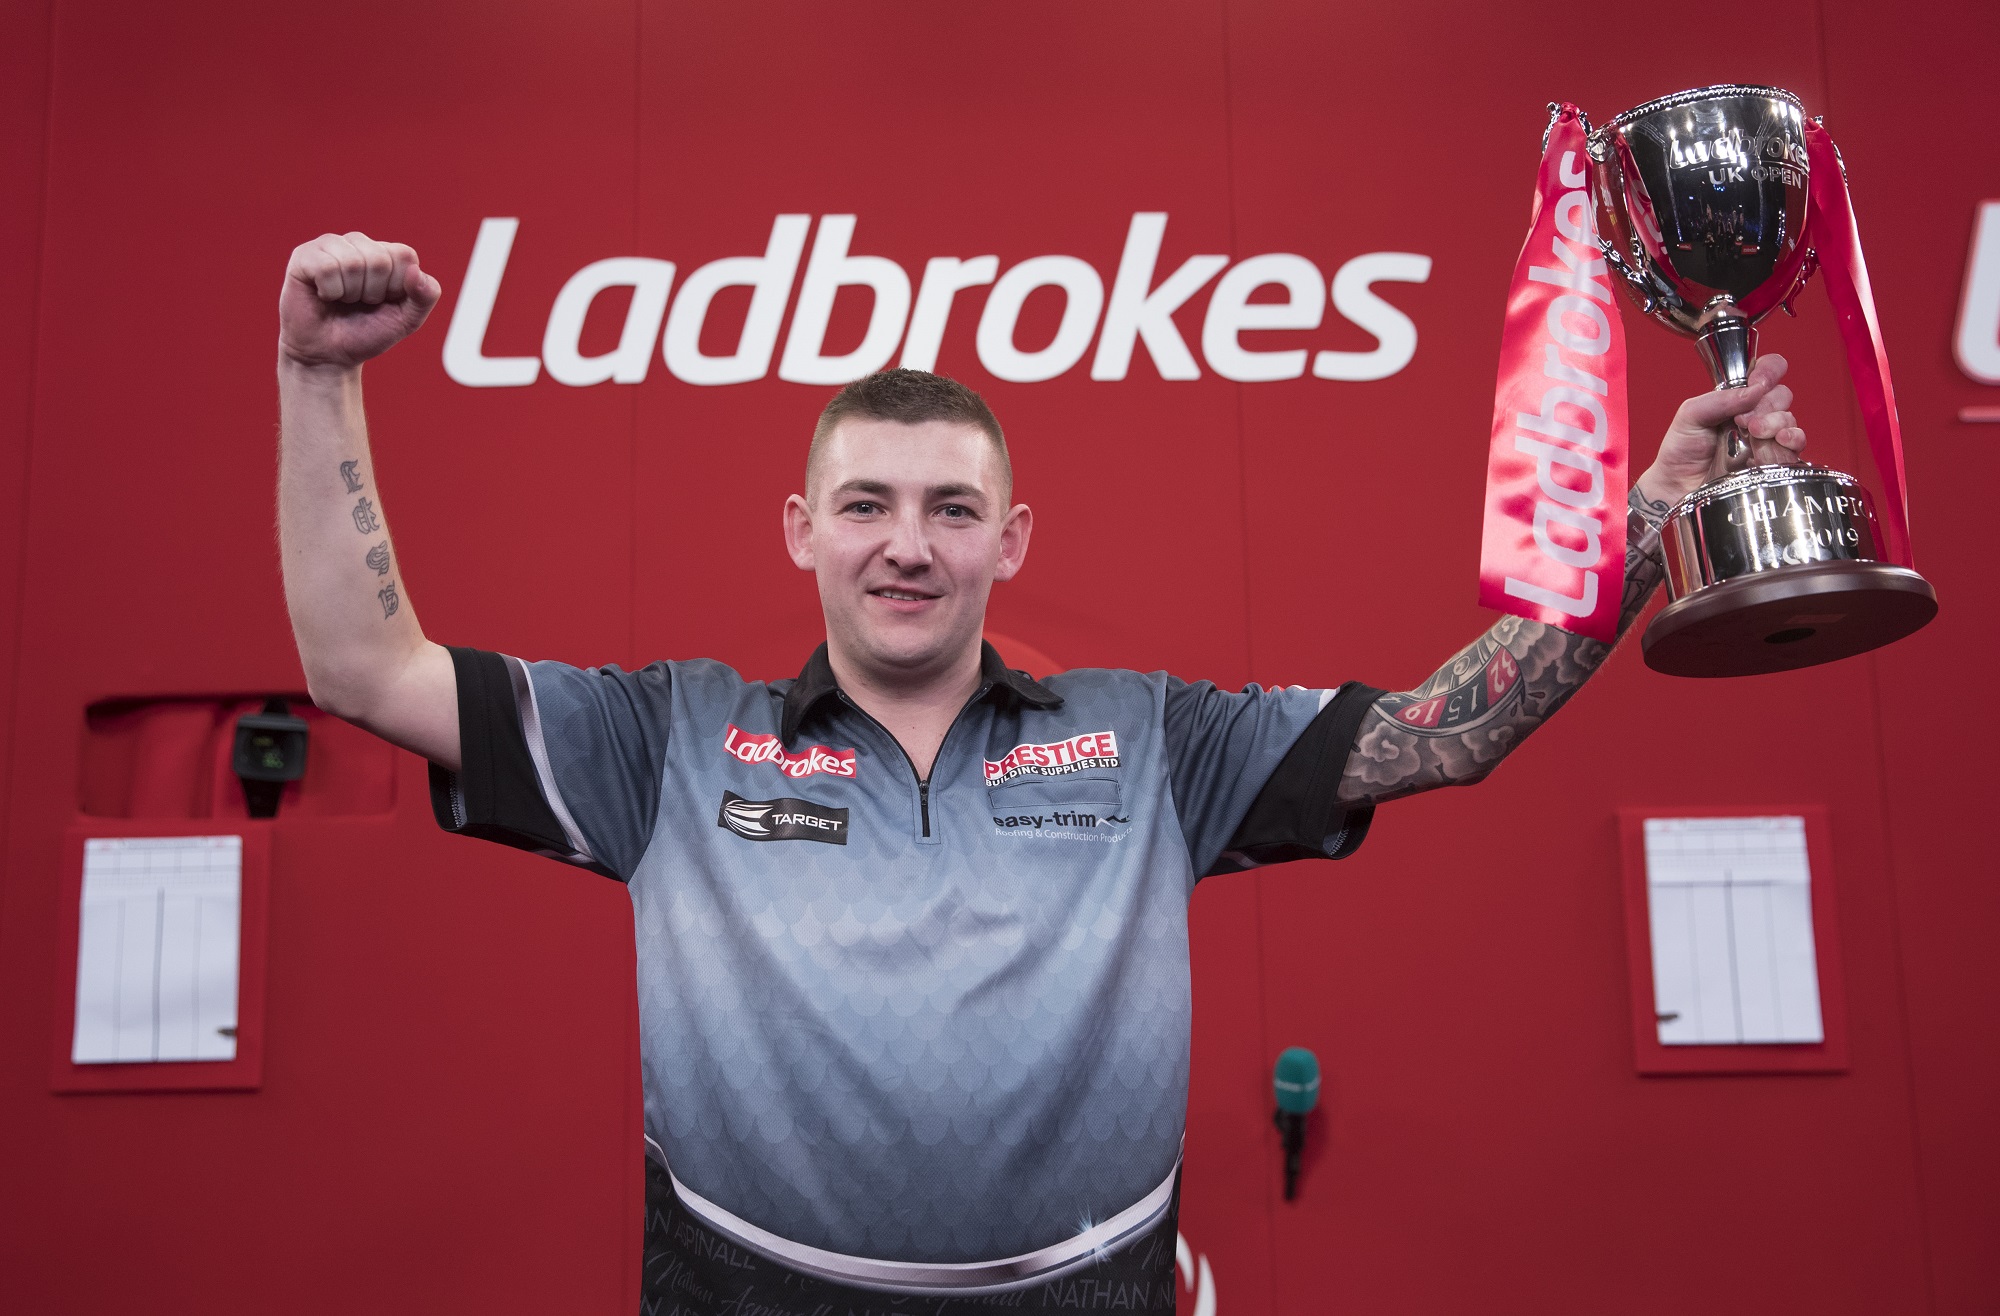 The field has been confirmed for the 2021 UK Darts Open